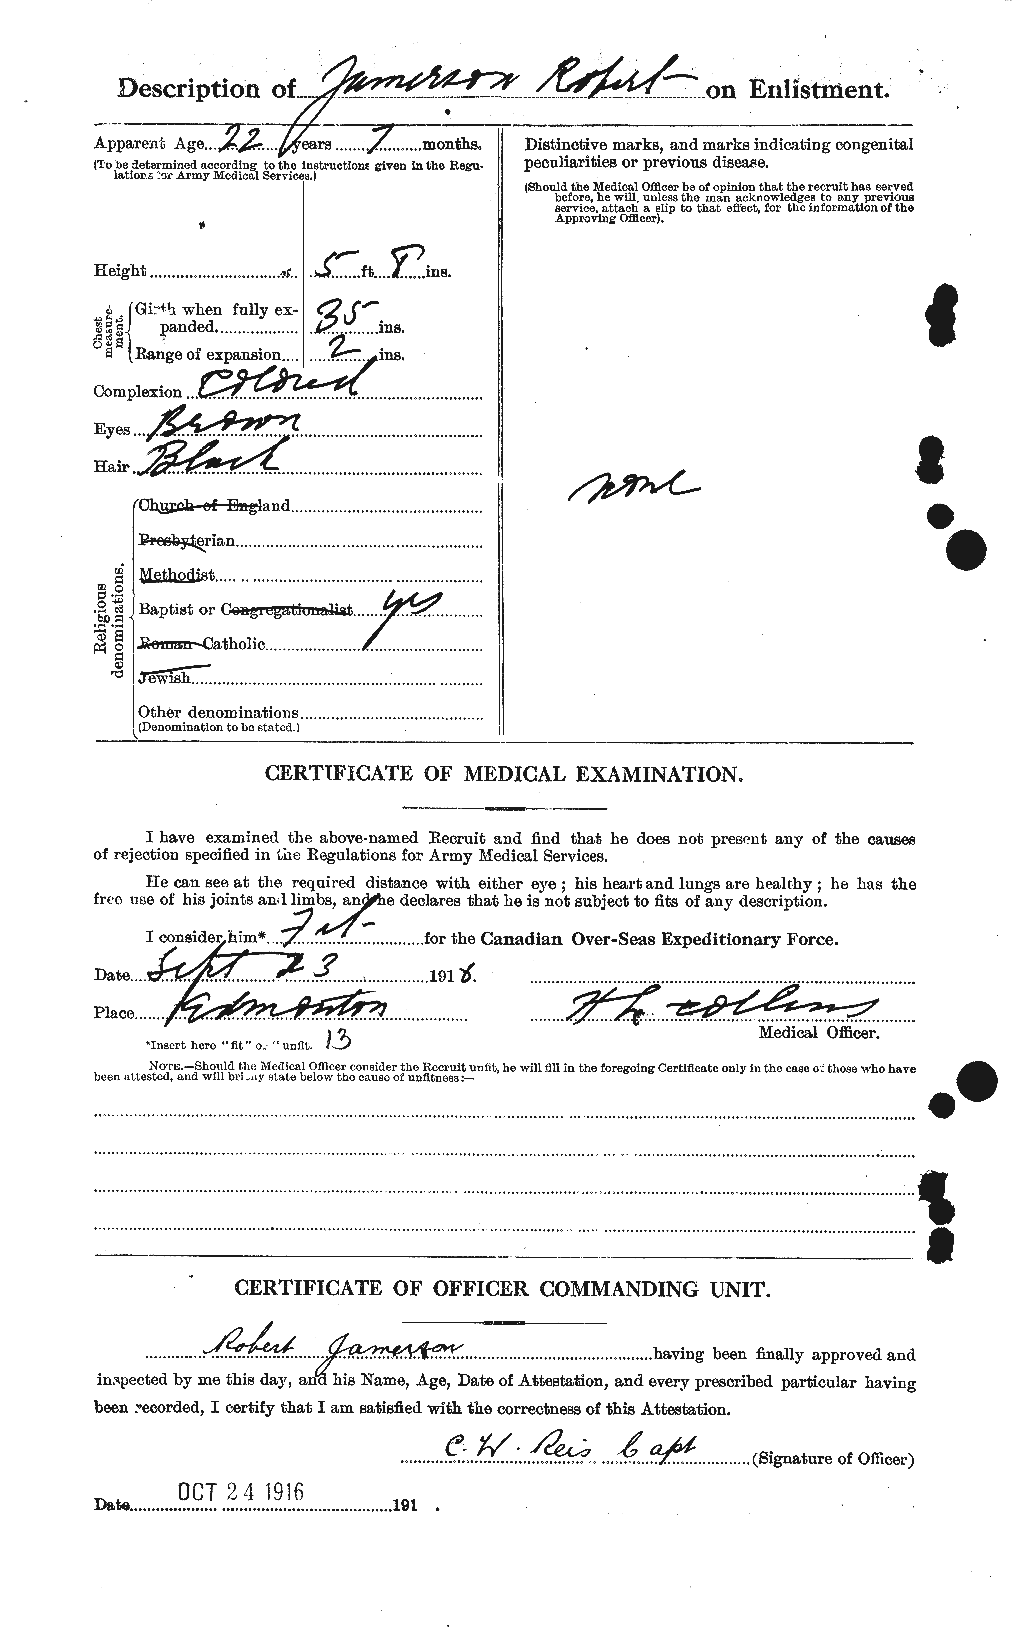 Personnel Records of the First World War - CEF 414156b